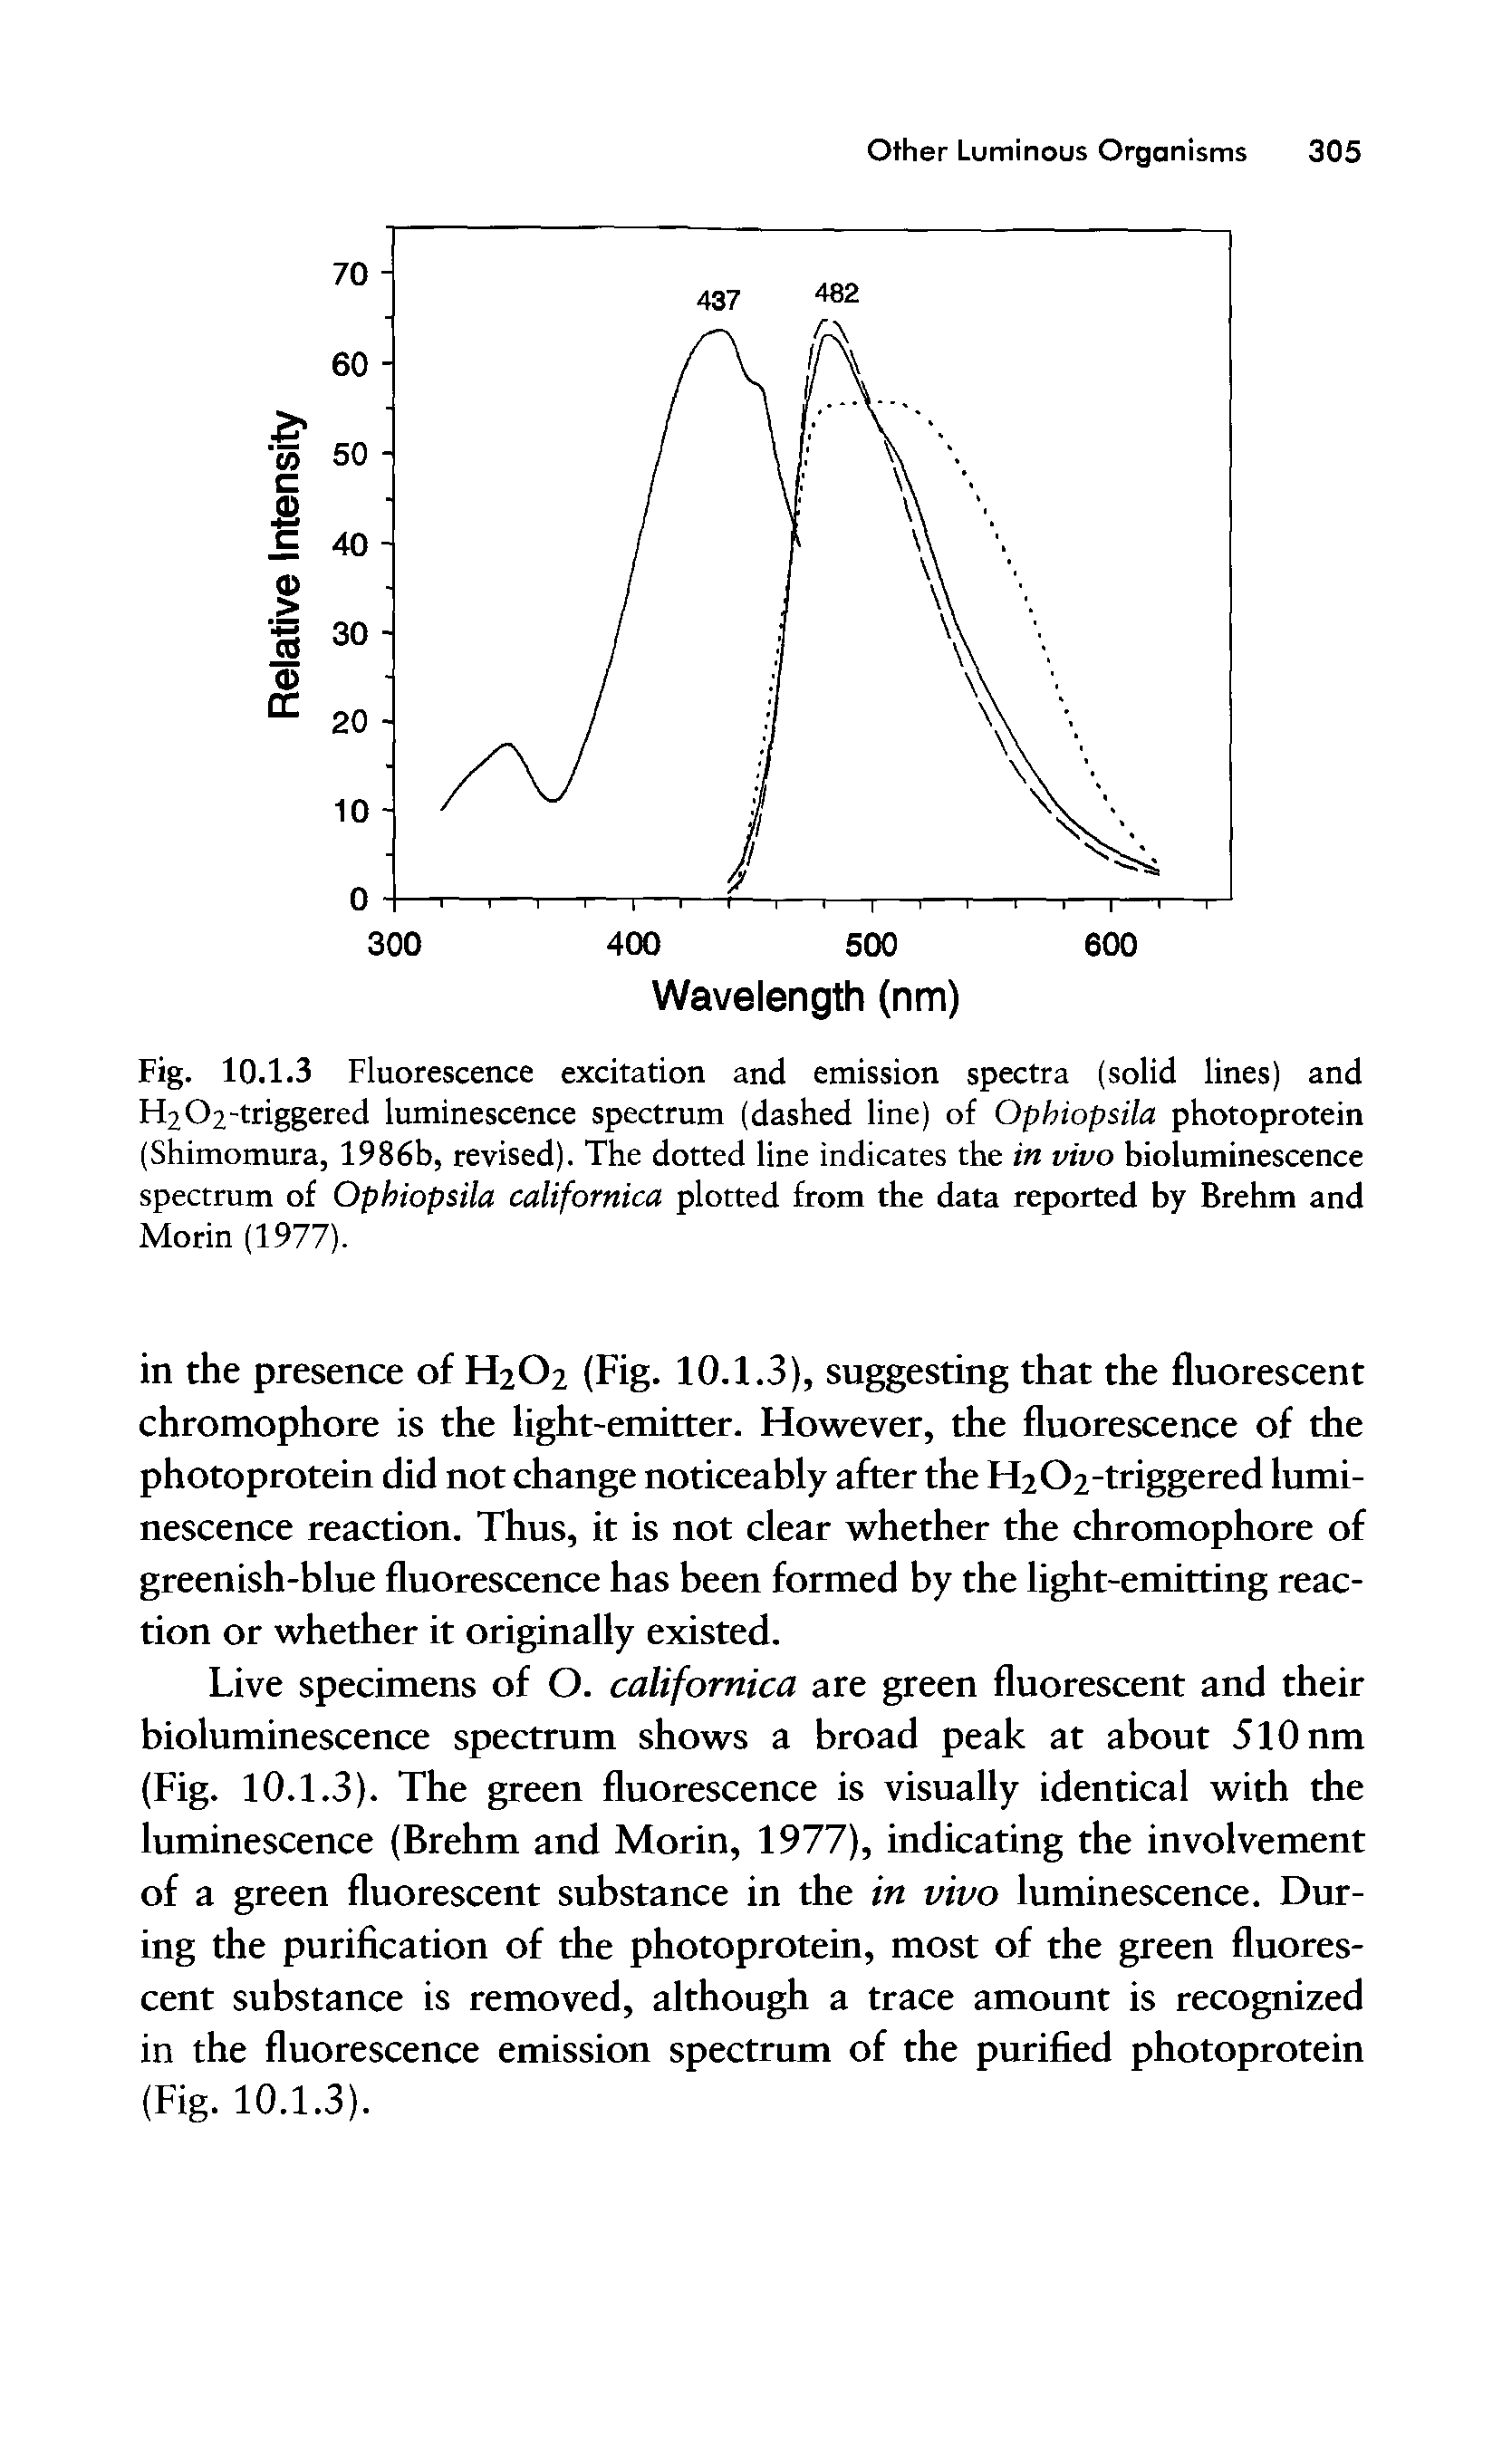 Fig. 10.1.3 Fluorescence excitation and emission spectra (solid lines) and H2O2-triggered luminescence spectrum (dashed line) of Ophiopsila photoprotein (Shimomura, 1986b, revised). The dotted line indicates the in vivo bioluminescence spectrum of Ophiopsila californica plotted from the data reported by Brehm and Morin (1977).